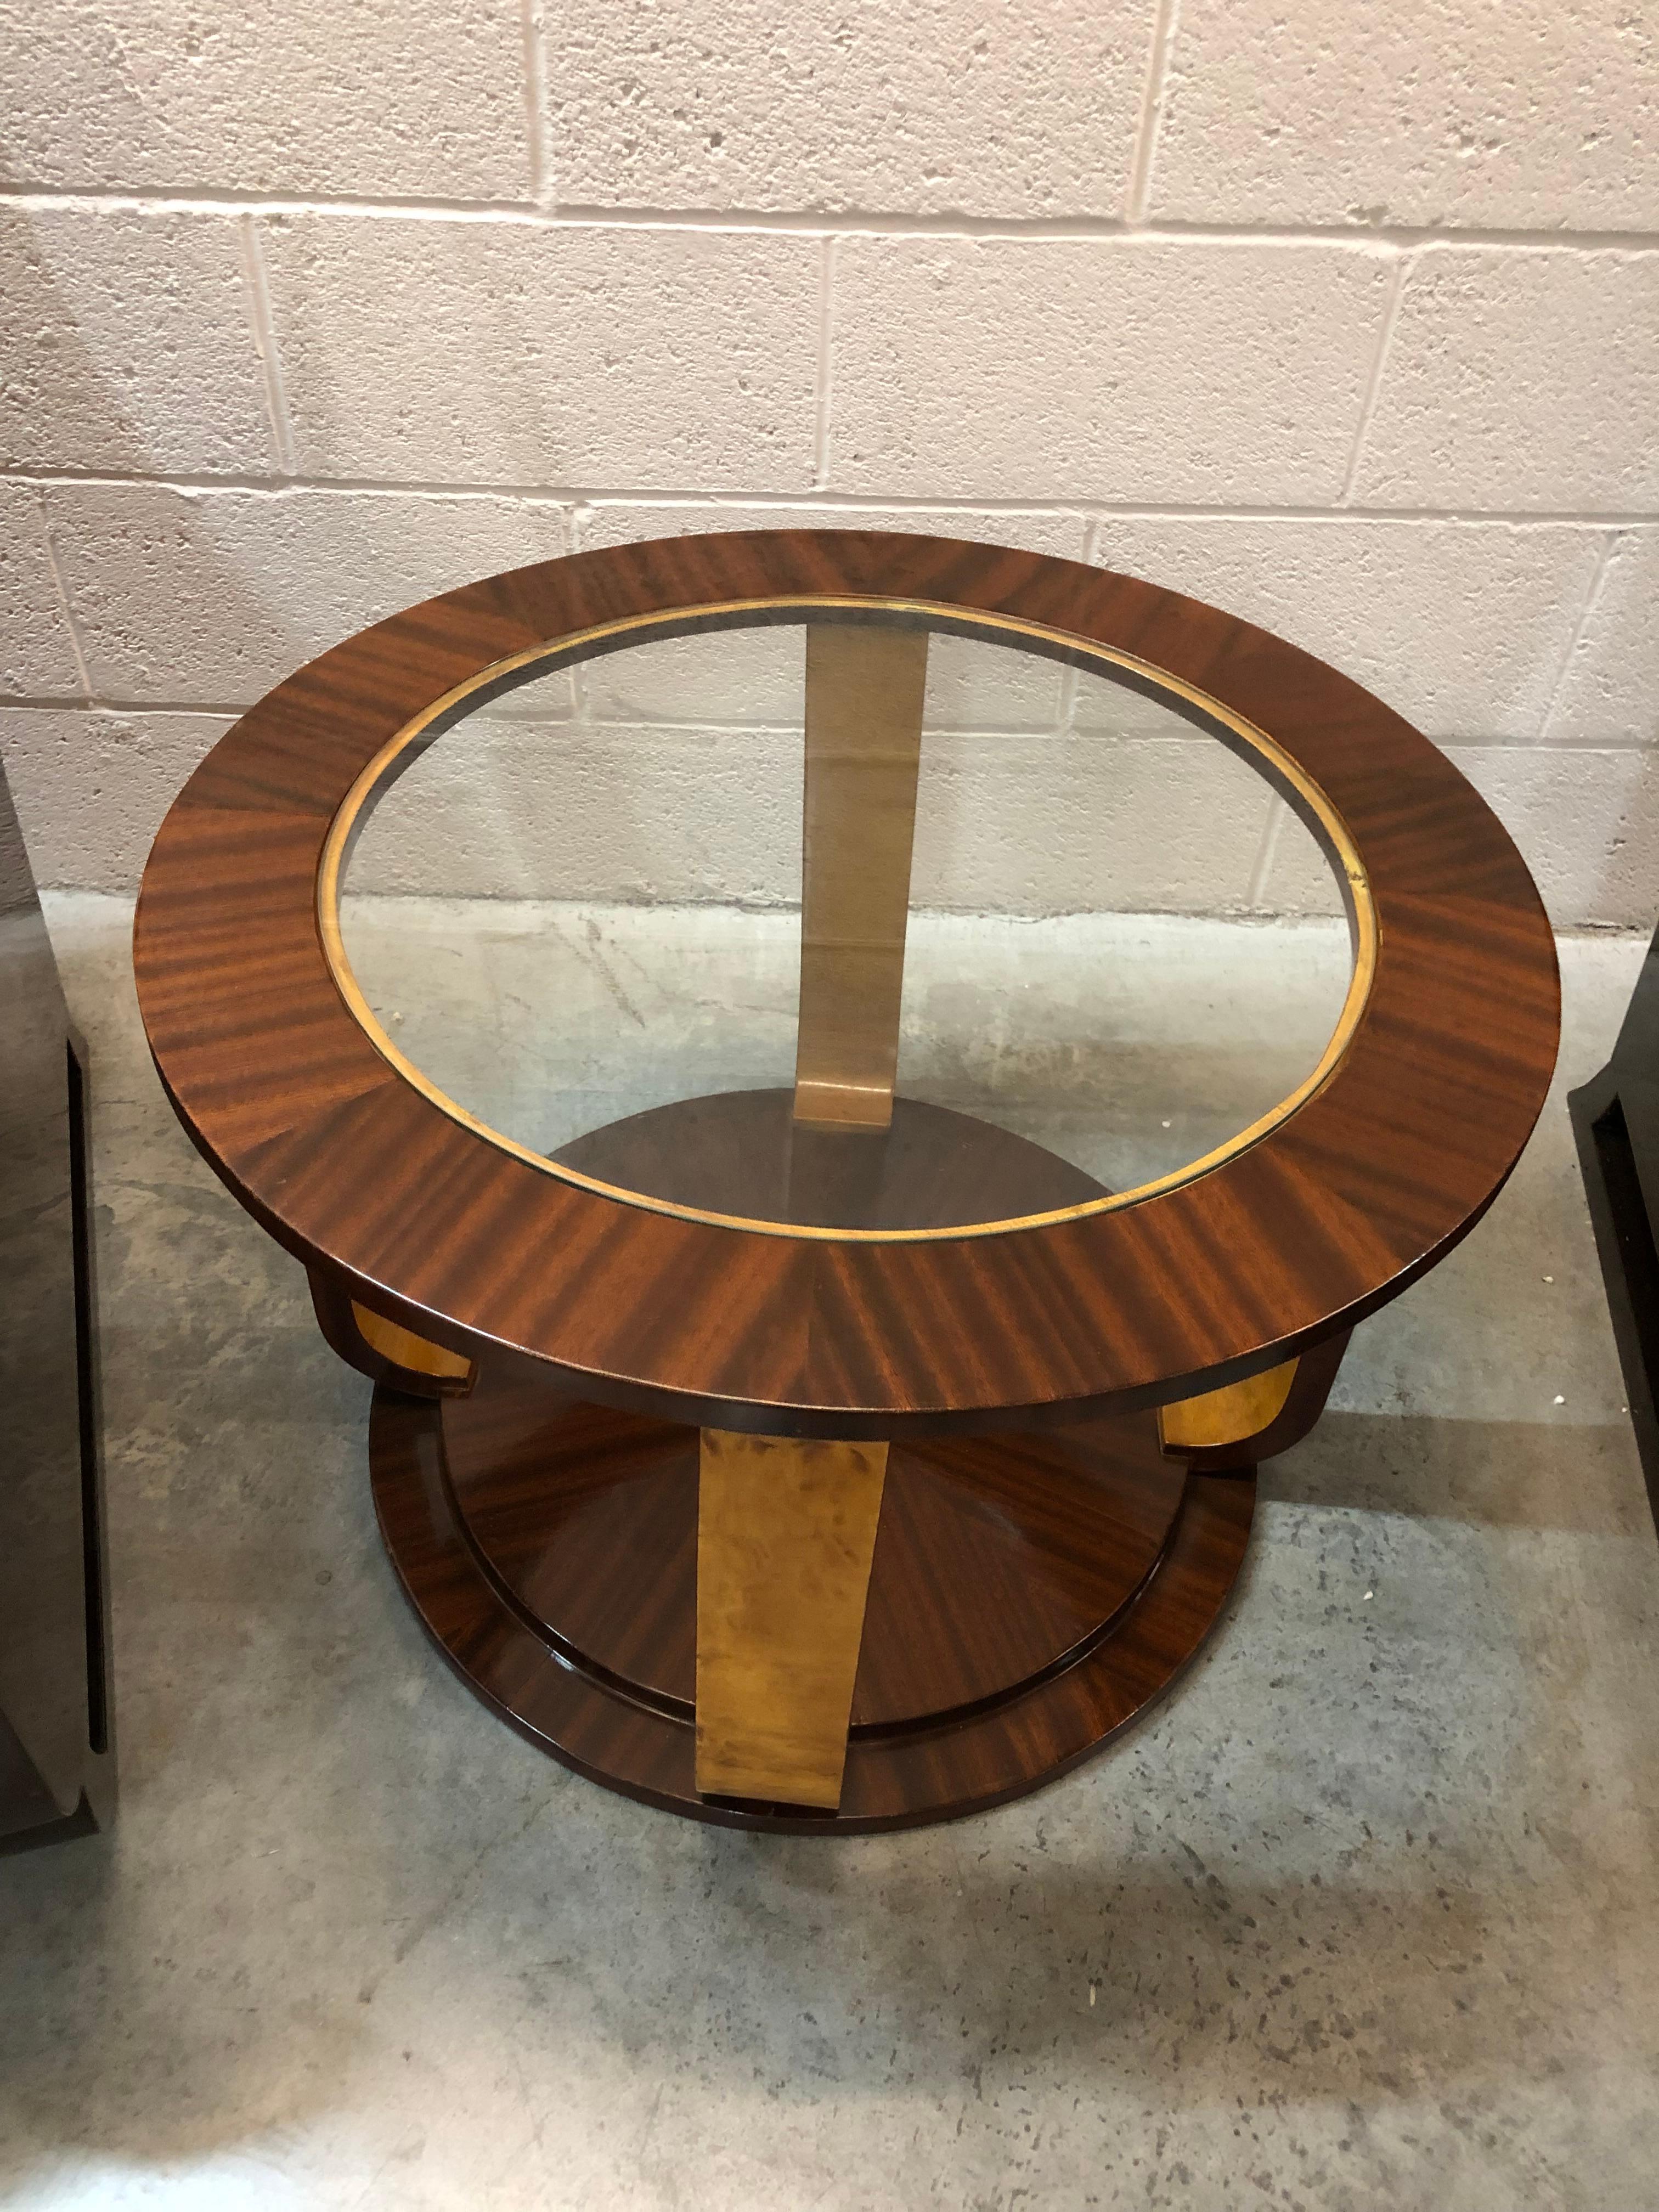 Amaizing Art Deco, Table in Wood and Glass, France, 1930 For Sale 8